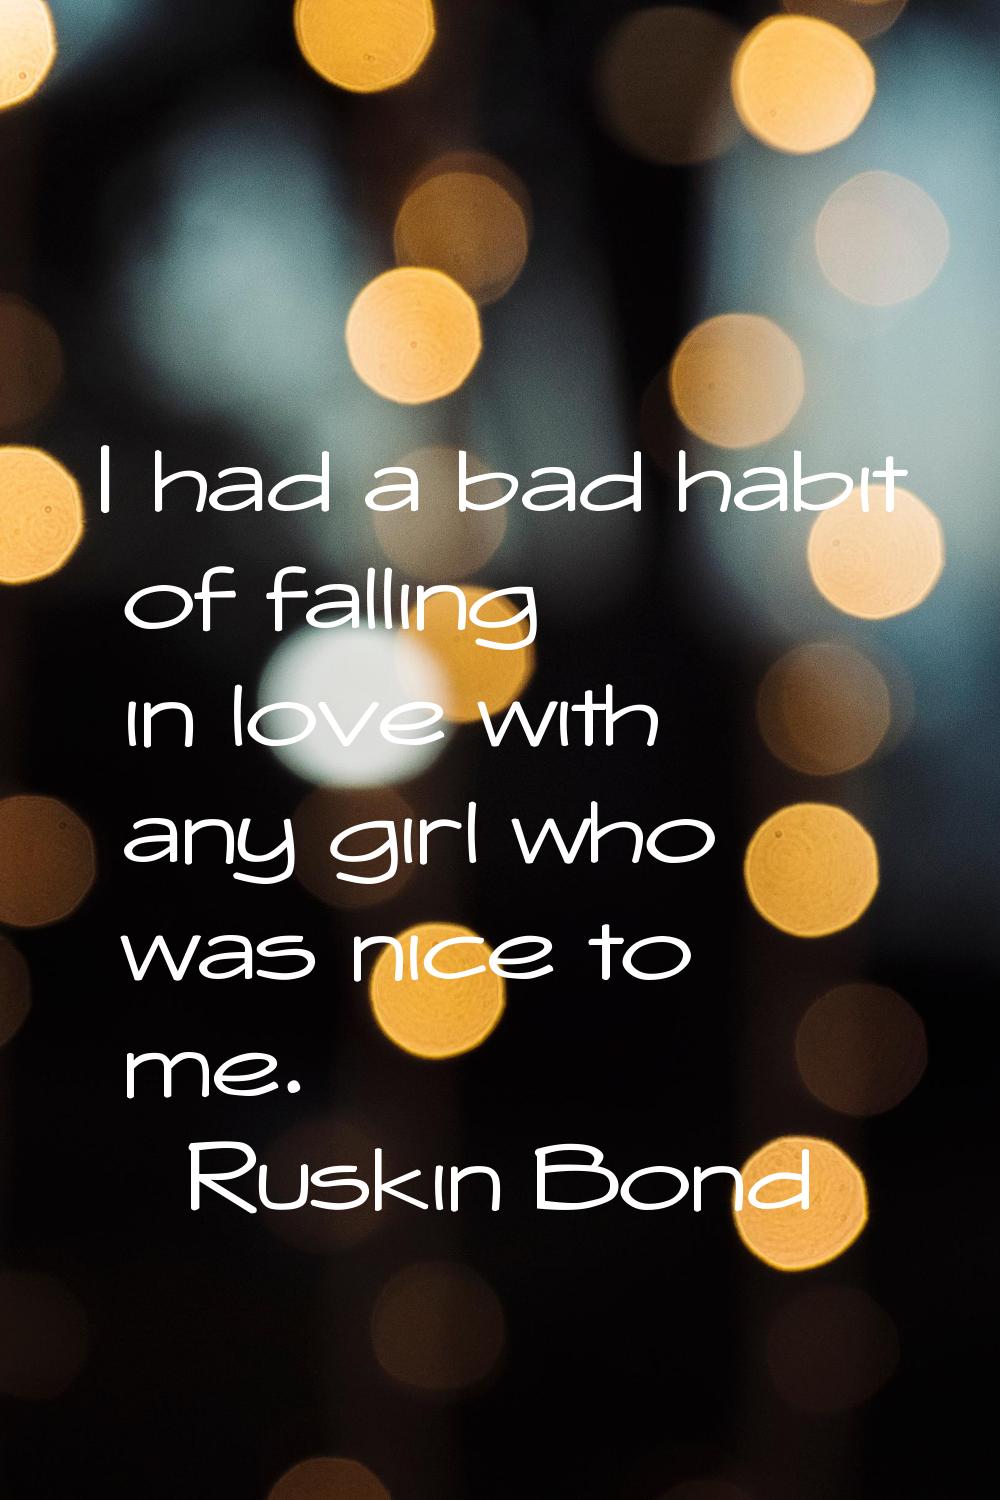 I had a bad habit of falling in love with any girl who was nice to me.